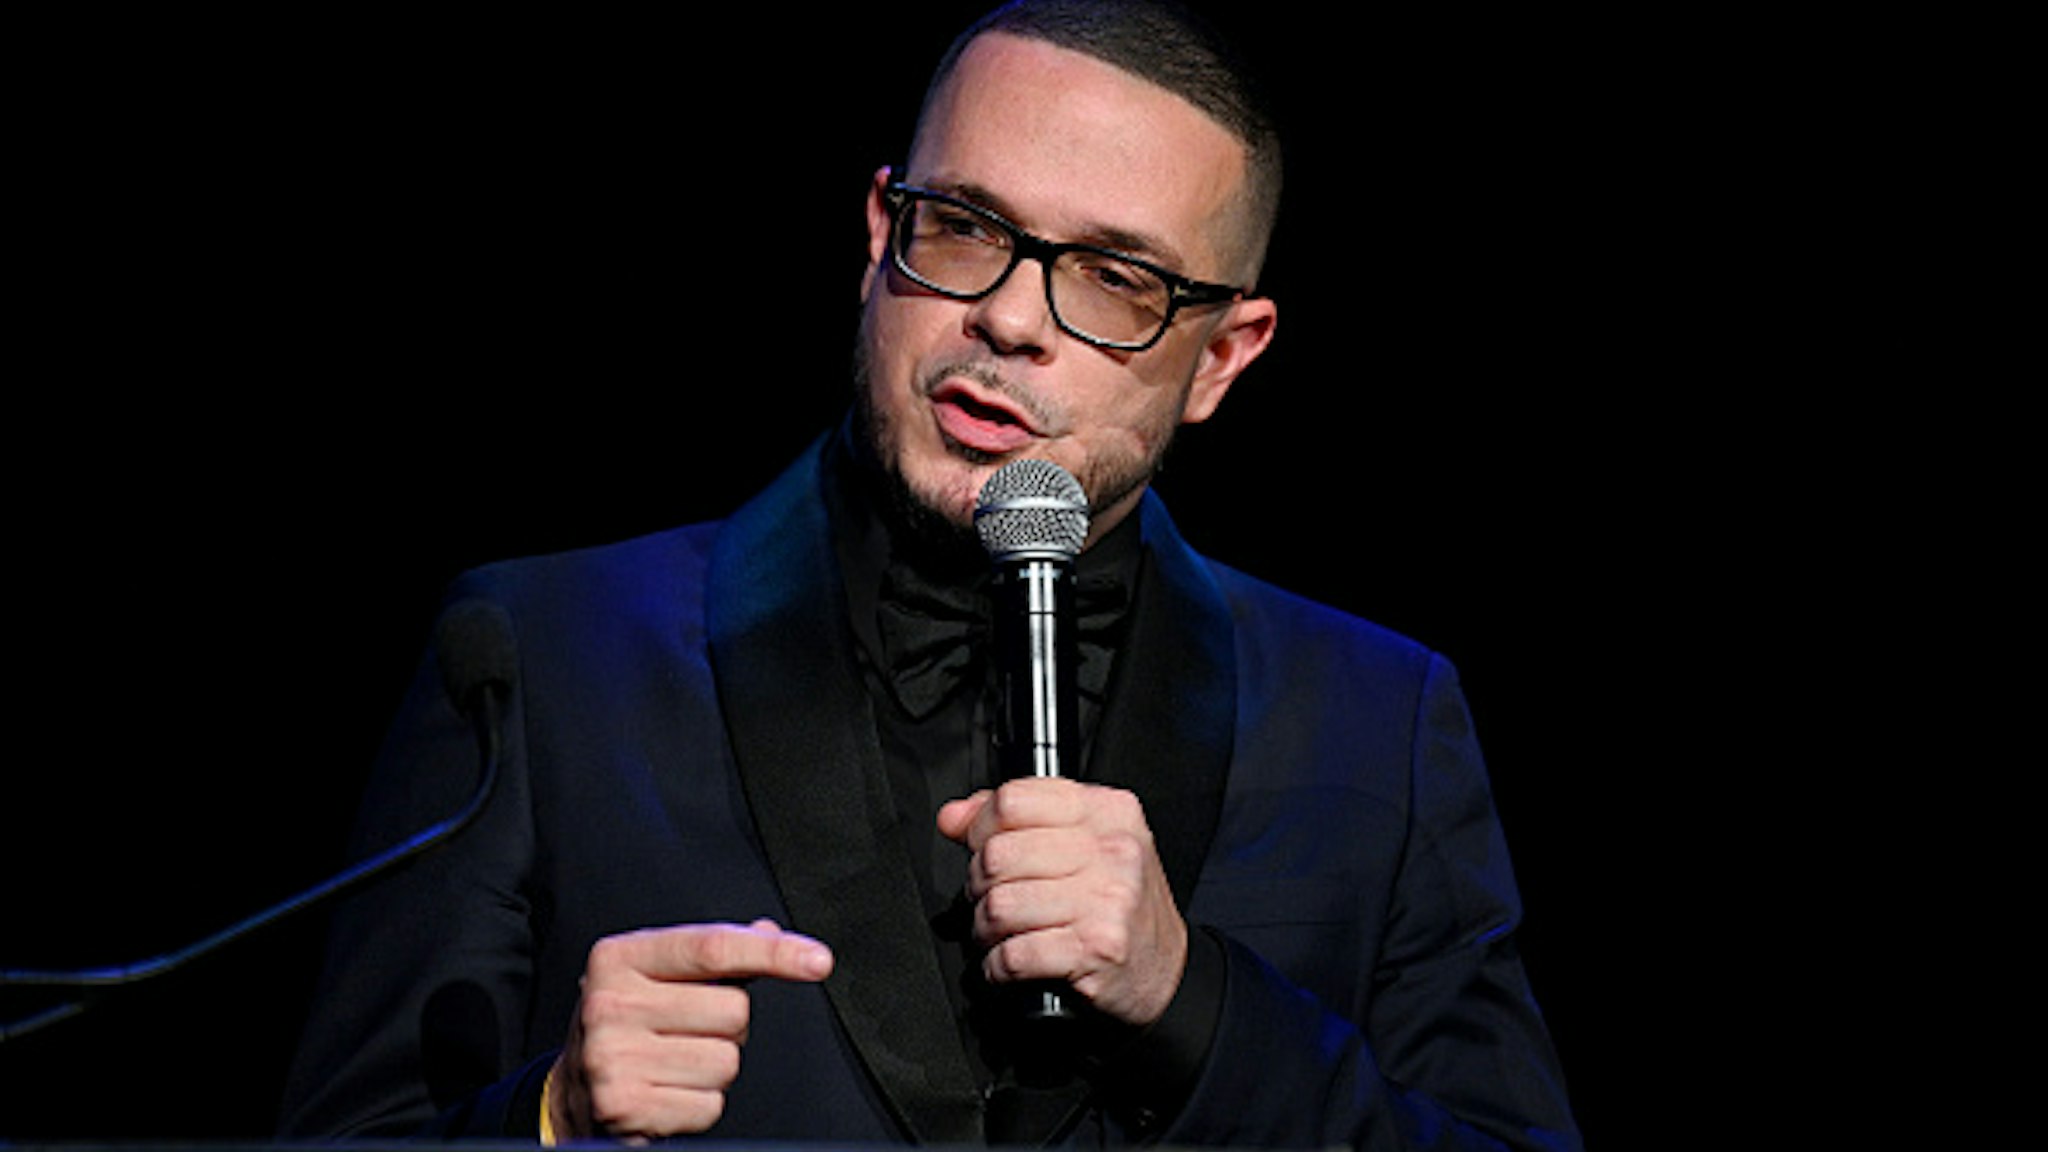 NEW YORK, NEW YORK - SEPTEMBER 12: Shaun King accepts an award onstage during Rihanna's 5th Annual Diamond Ball Benefitting The Clara Lionel Foundation at Cipriani Wall Street on September 12, 2019 in New York City.